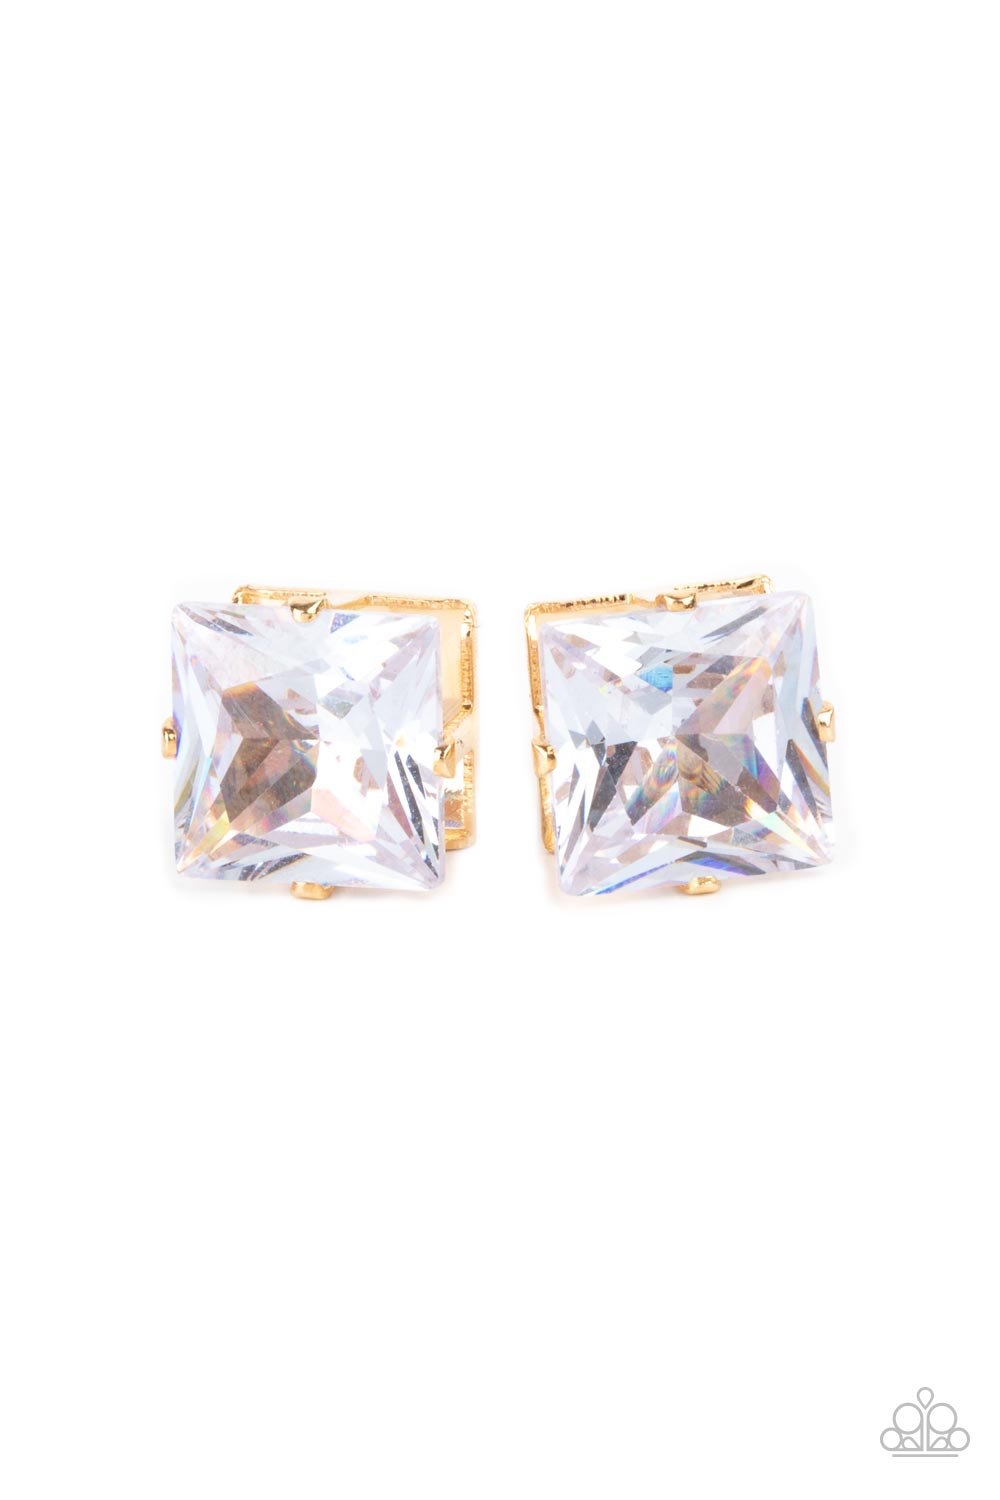 Paparazzi Accessories - Times Square Timeless #E602 - Gold Earrings